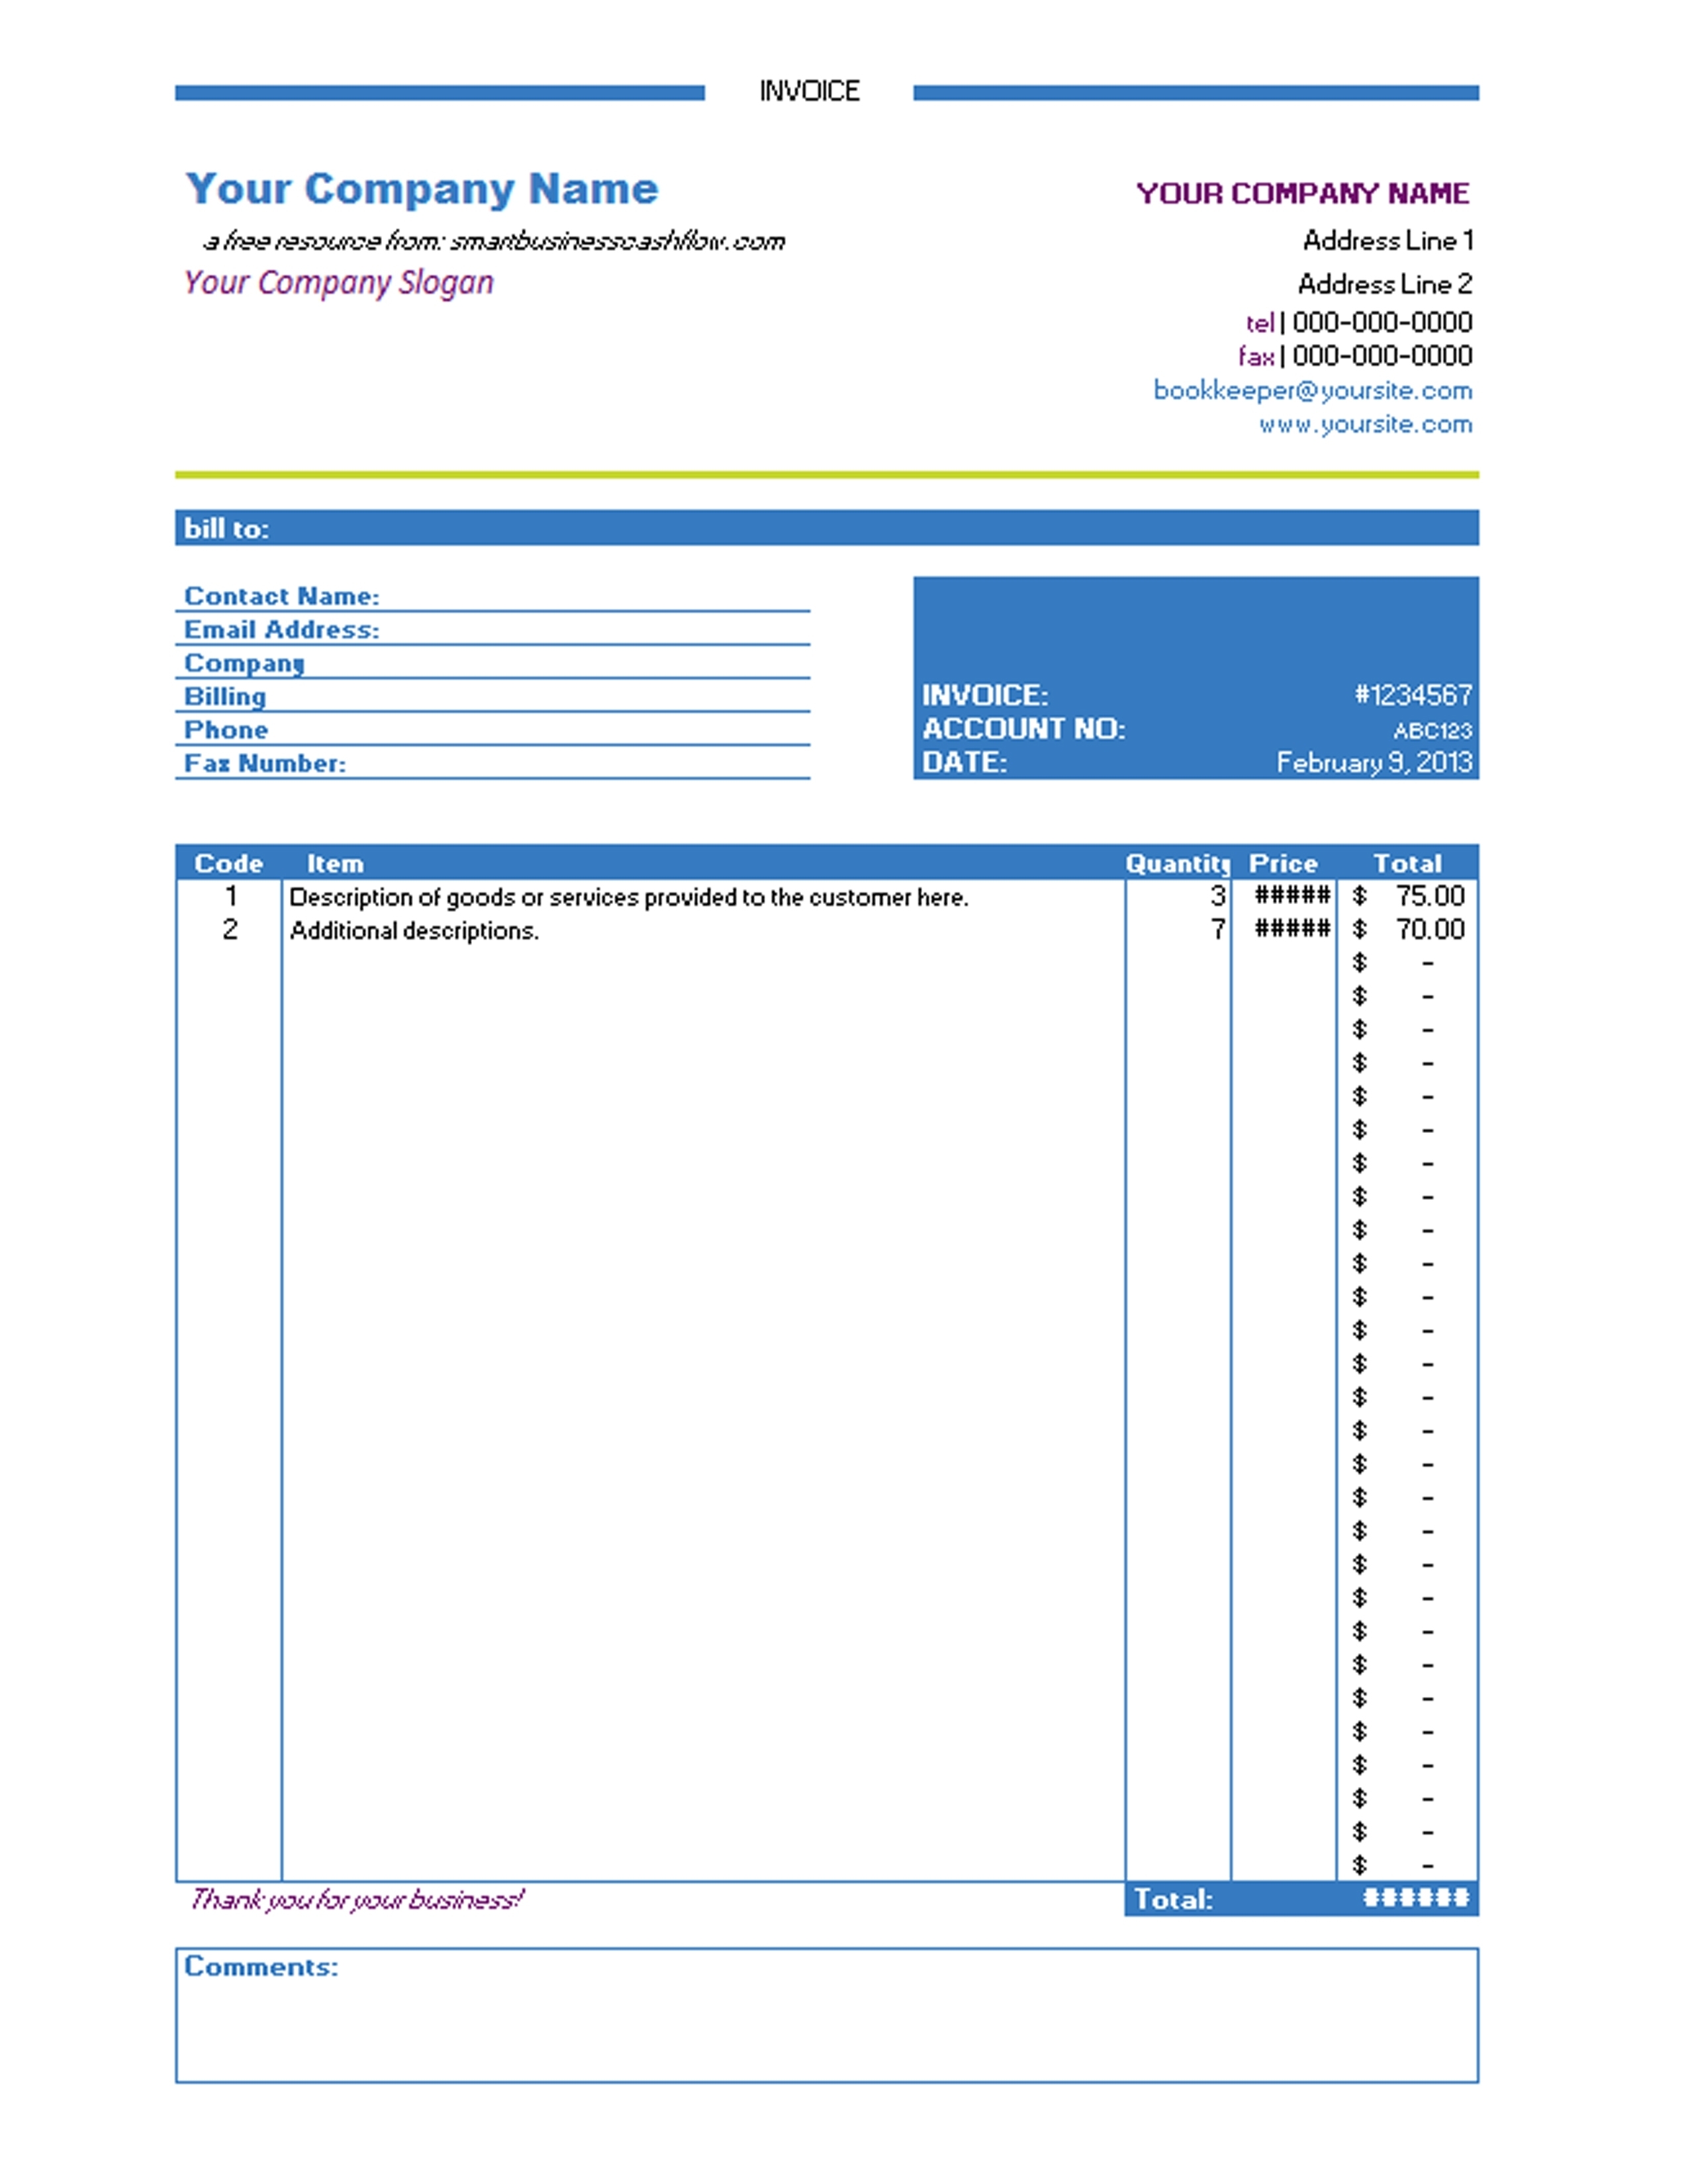 creating-an-invoice-in-excel-invoice-template-ideas